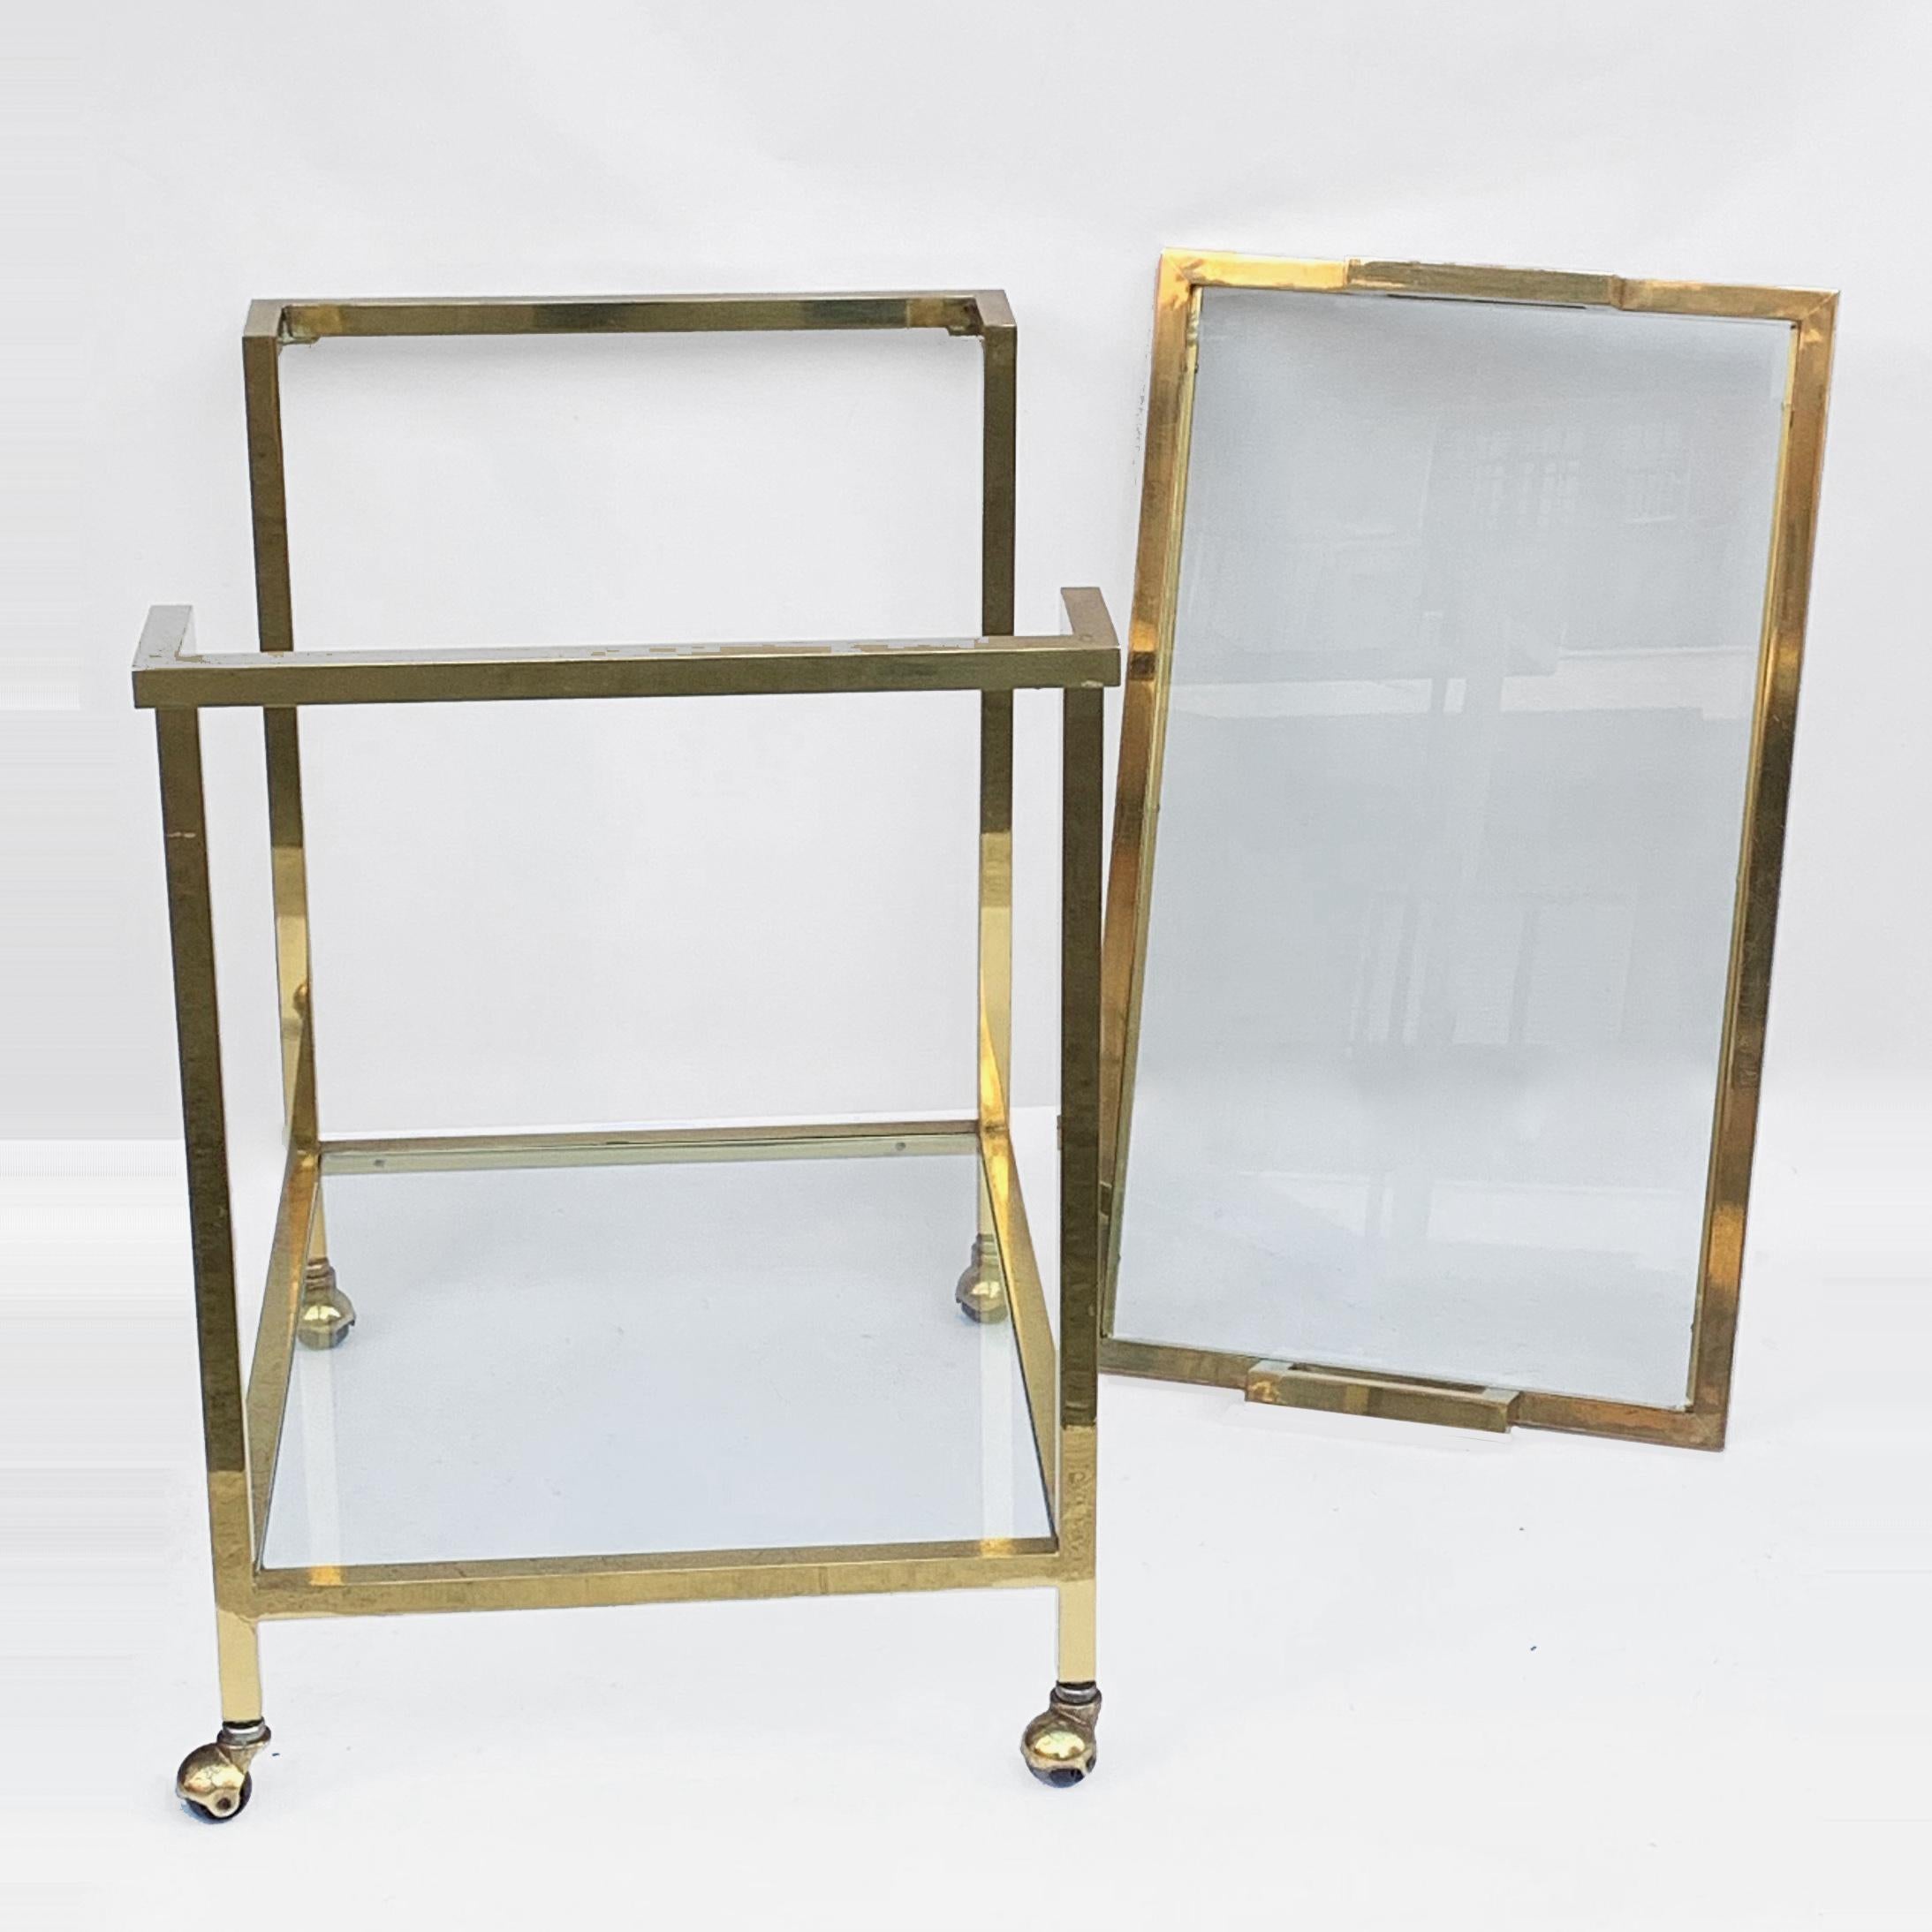 Romeo Rega style Trolley with Service Tray, Gilded Brass and Glass, Italy, 1980s For Sale 7